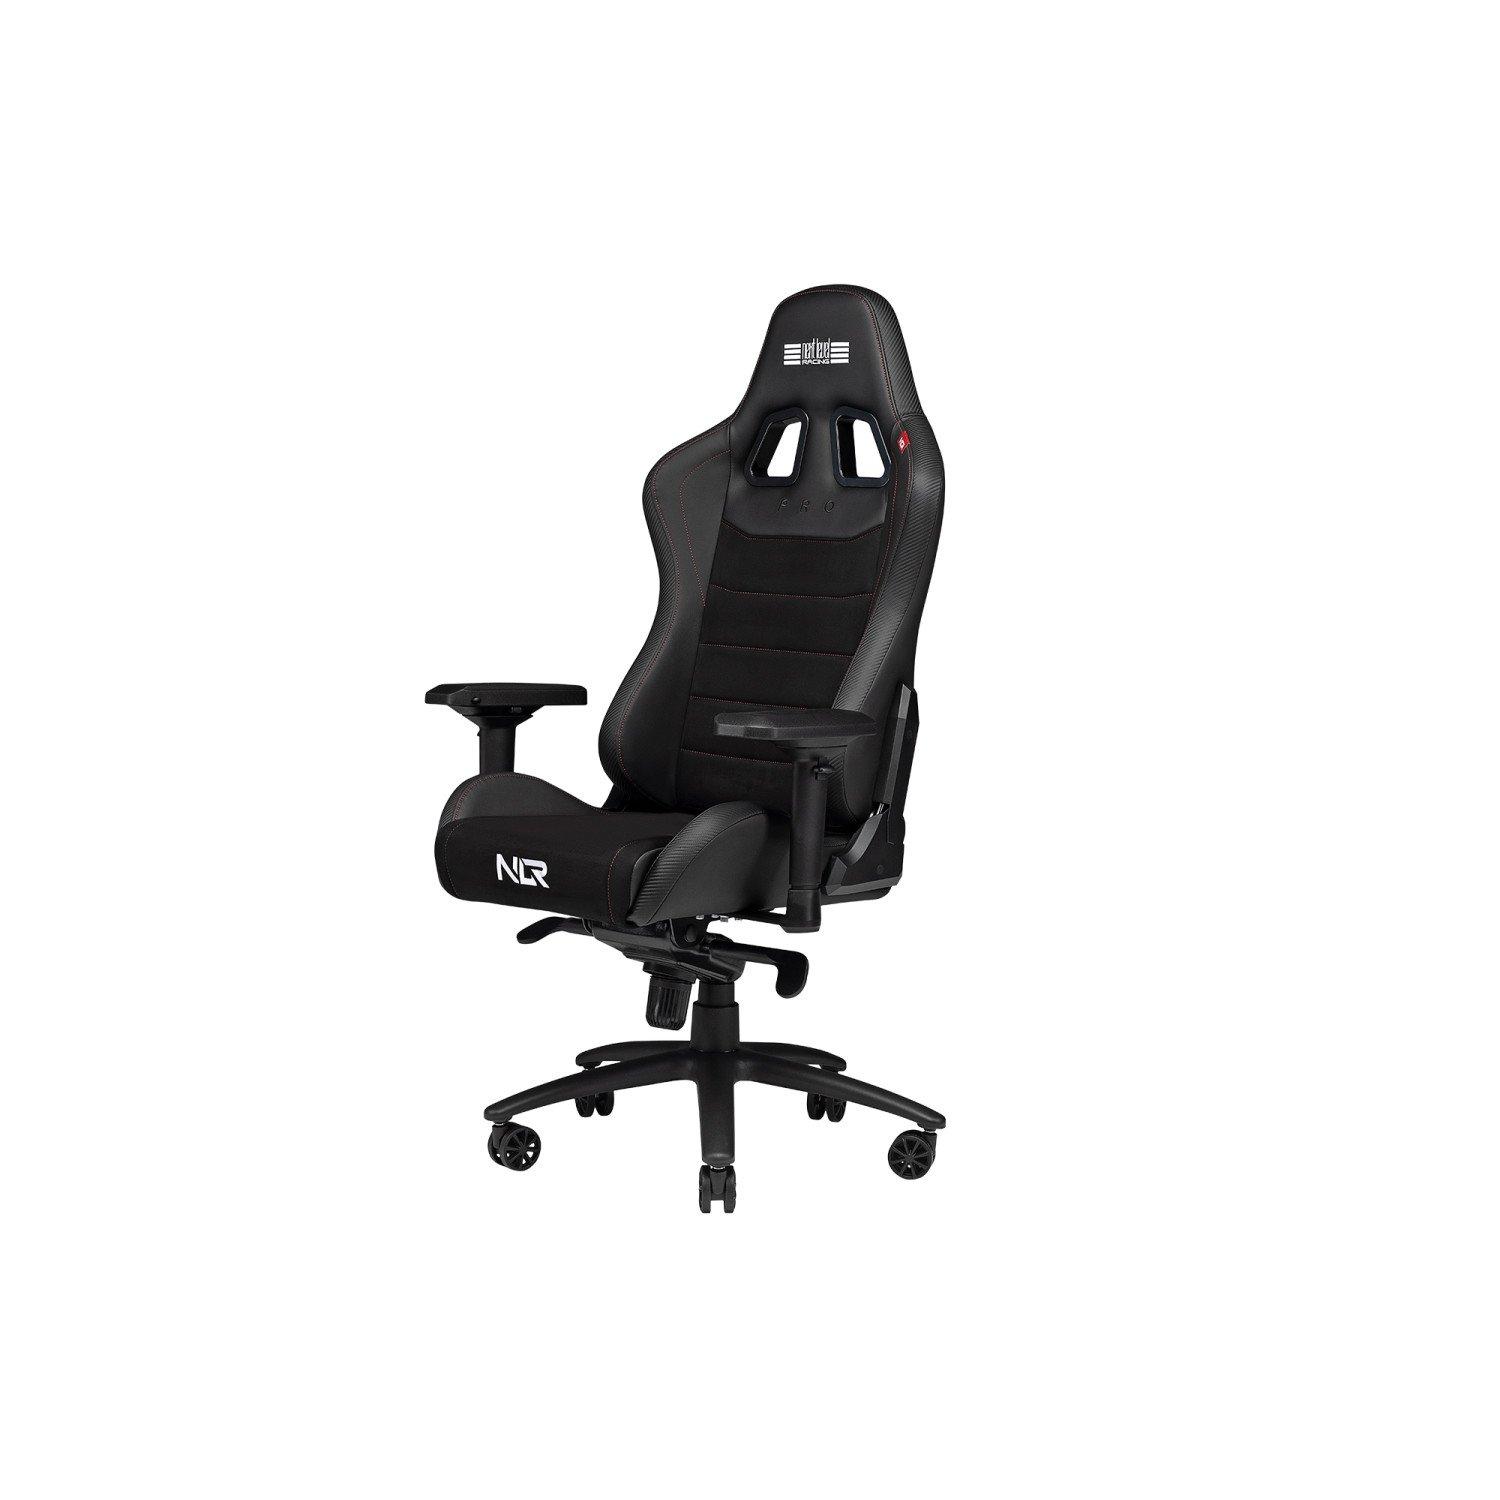 Next Level Racing PRO Gaming Chair Leather and Suede Edition